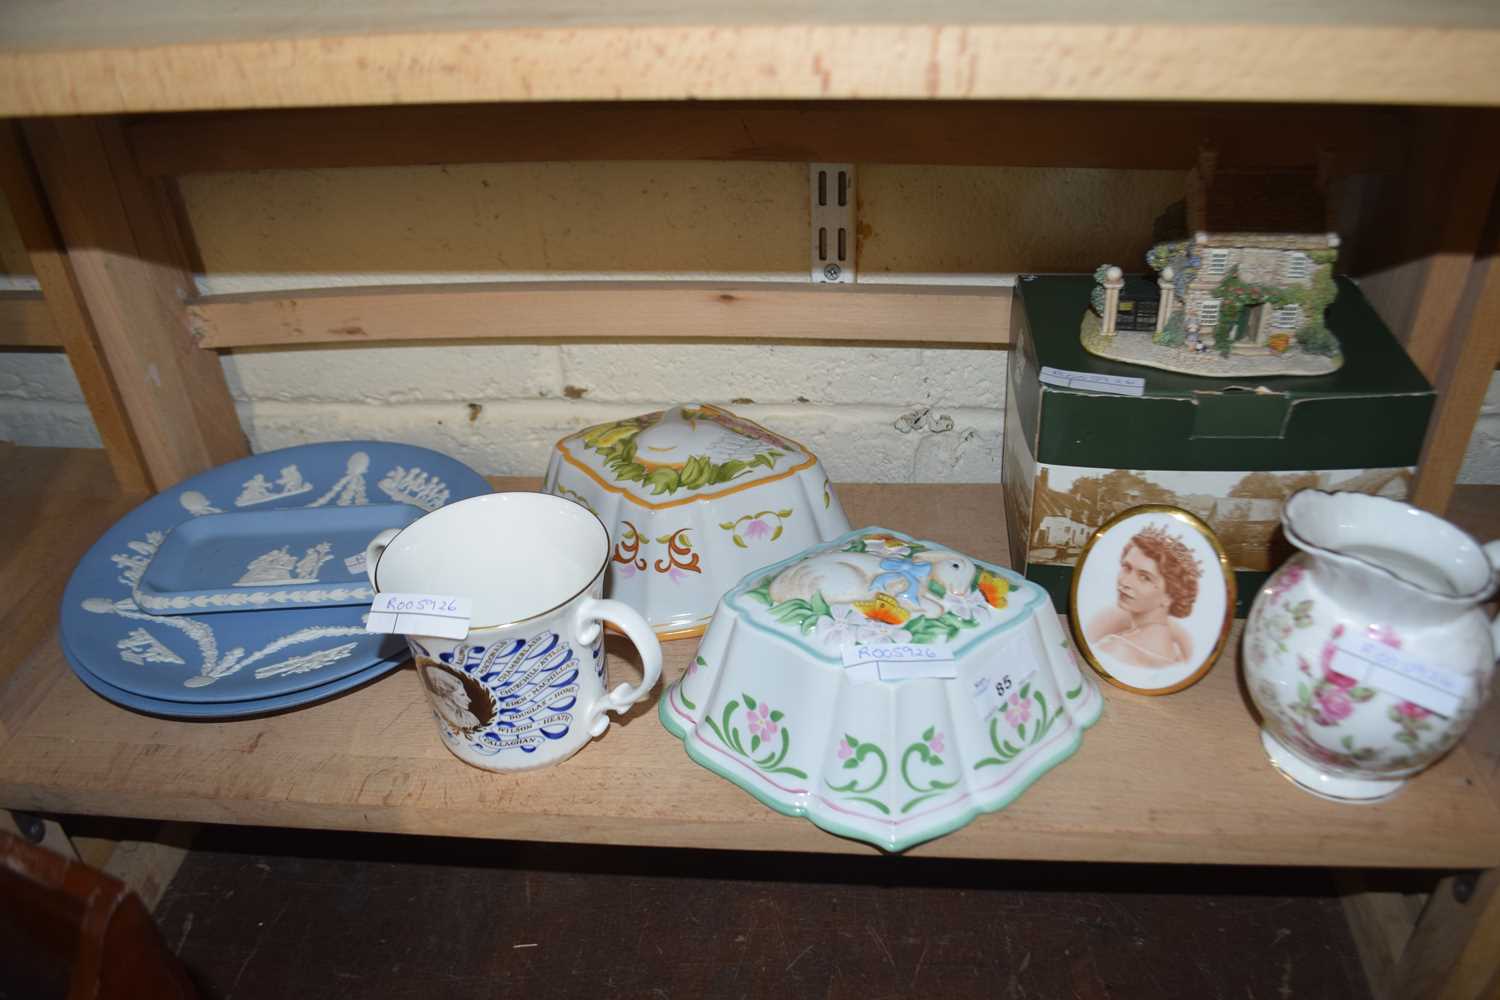 Mixed Lot: Ceramics to include Wedgwood, Jasper ware plates, modern jelly mould, a Lilliput Lane